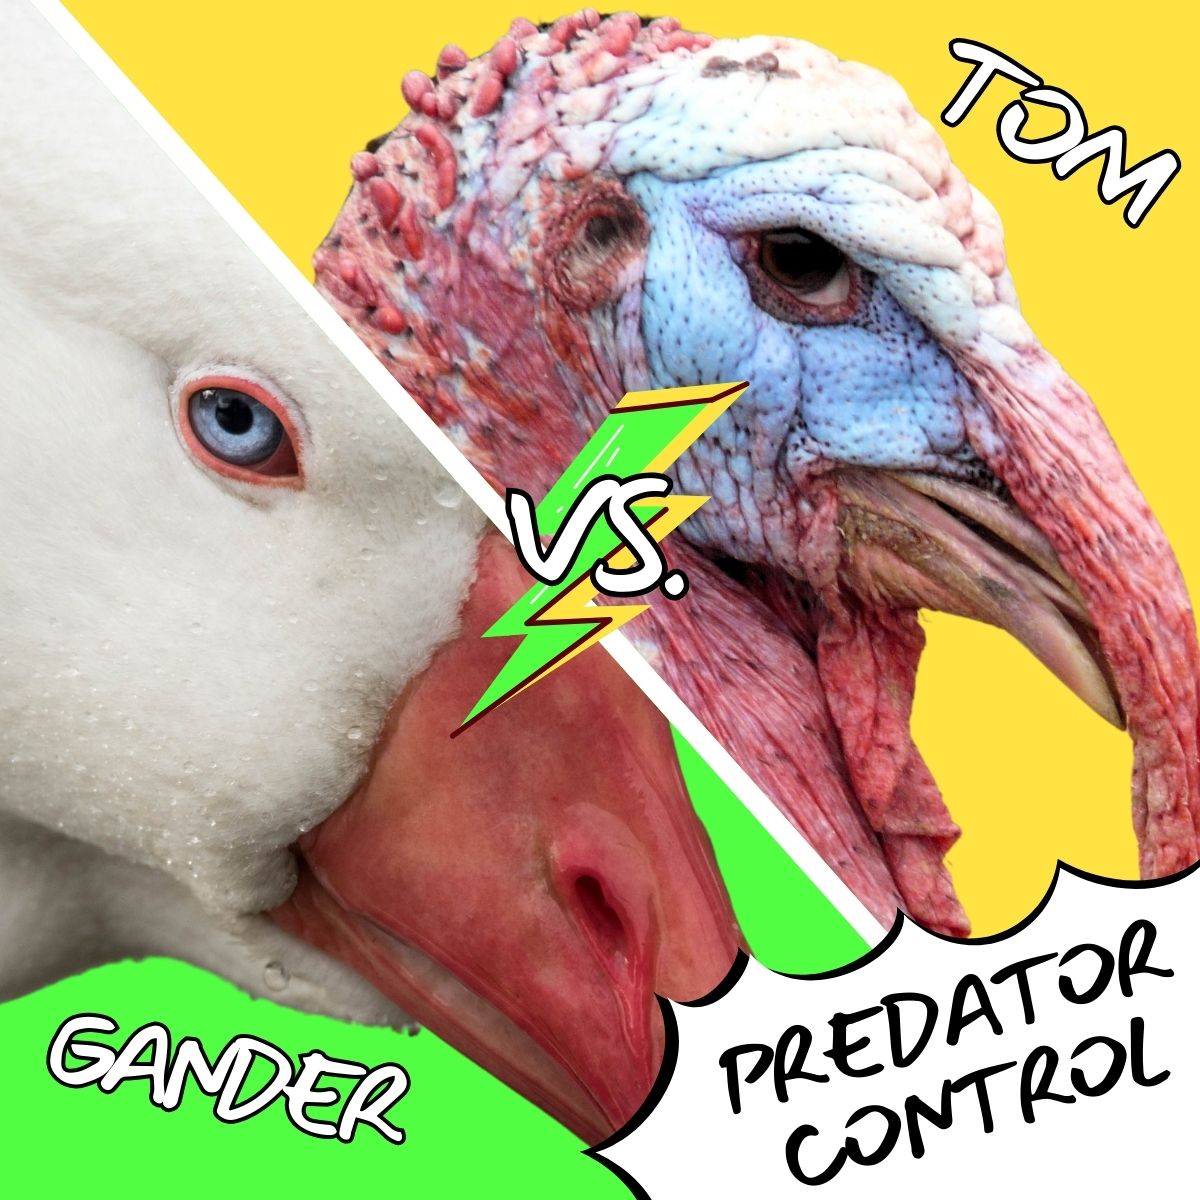 comic style image of a turkey and goose, with the caption "tom vs. gander, predator control"